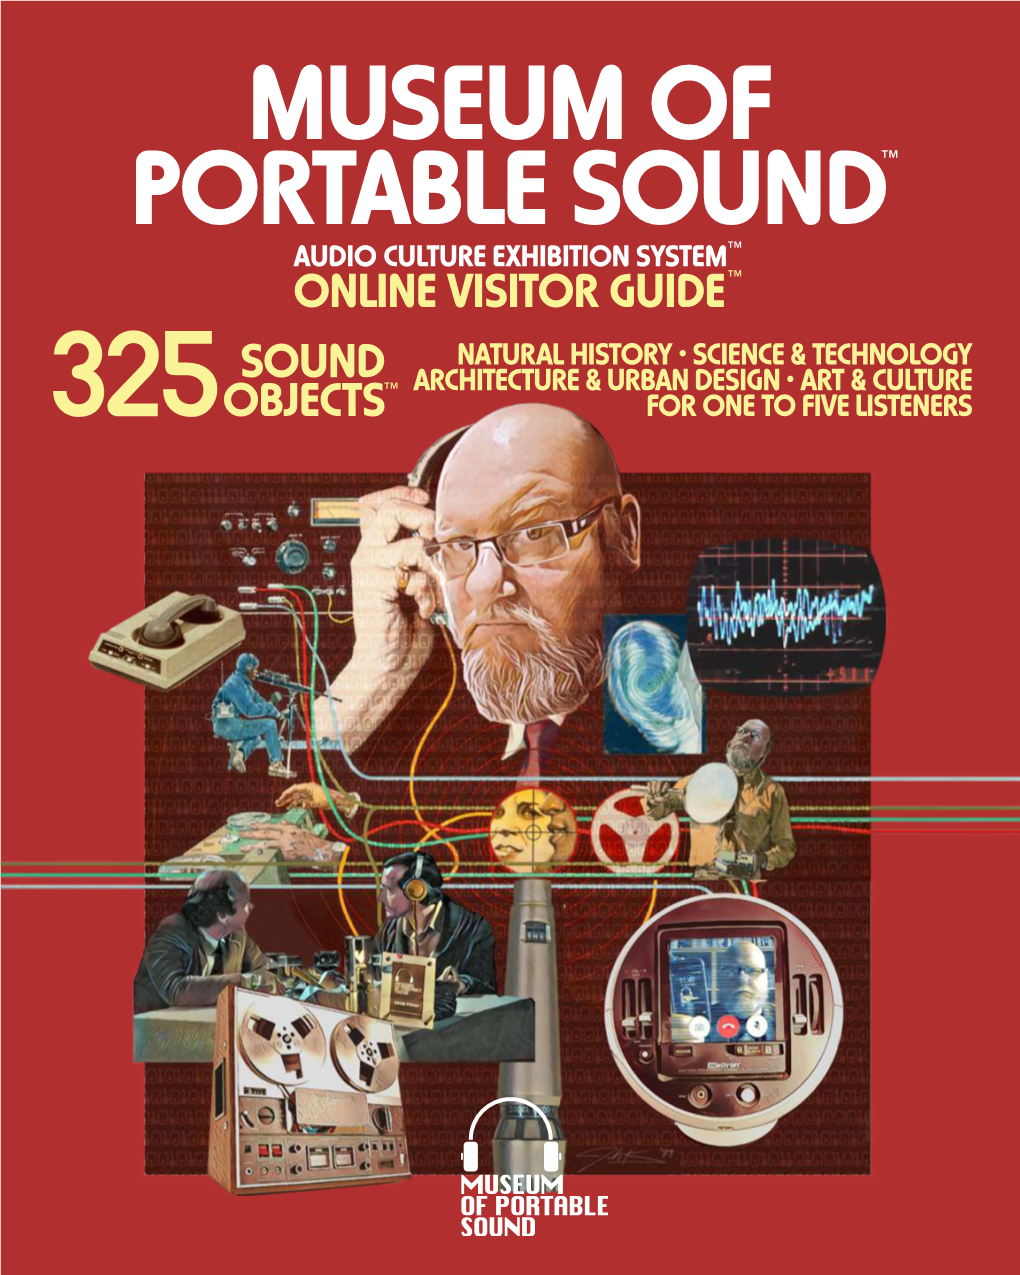 Online Visitor Guide™ Natural History • Science & Technology Sound Architecture & Urban Design • Art & Culture 325Objects™ for One to Five Listeners